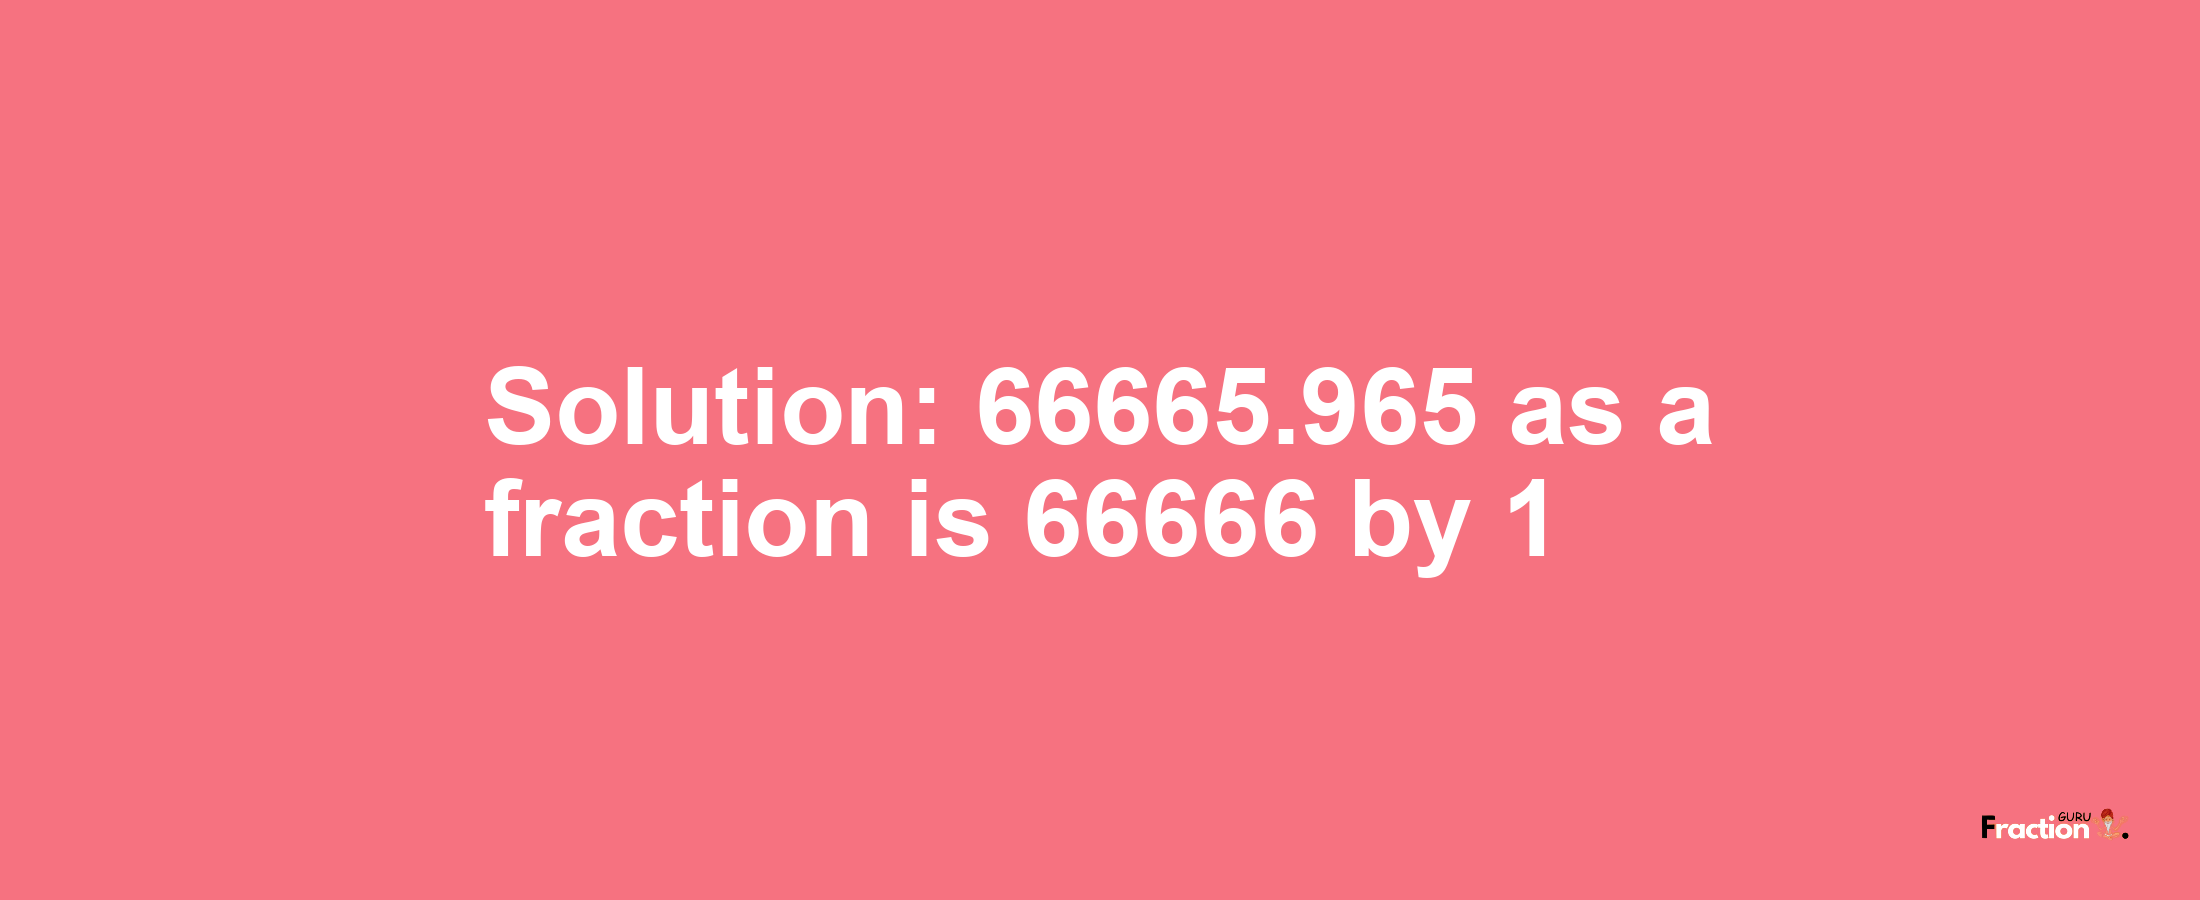 Solution:66665.965 as a fraction is 66666/1